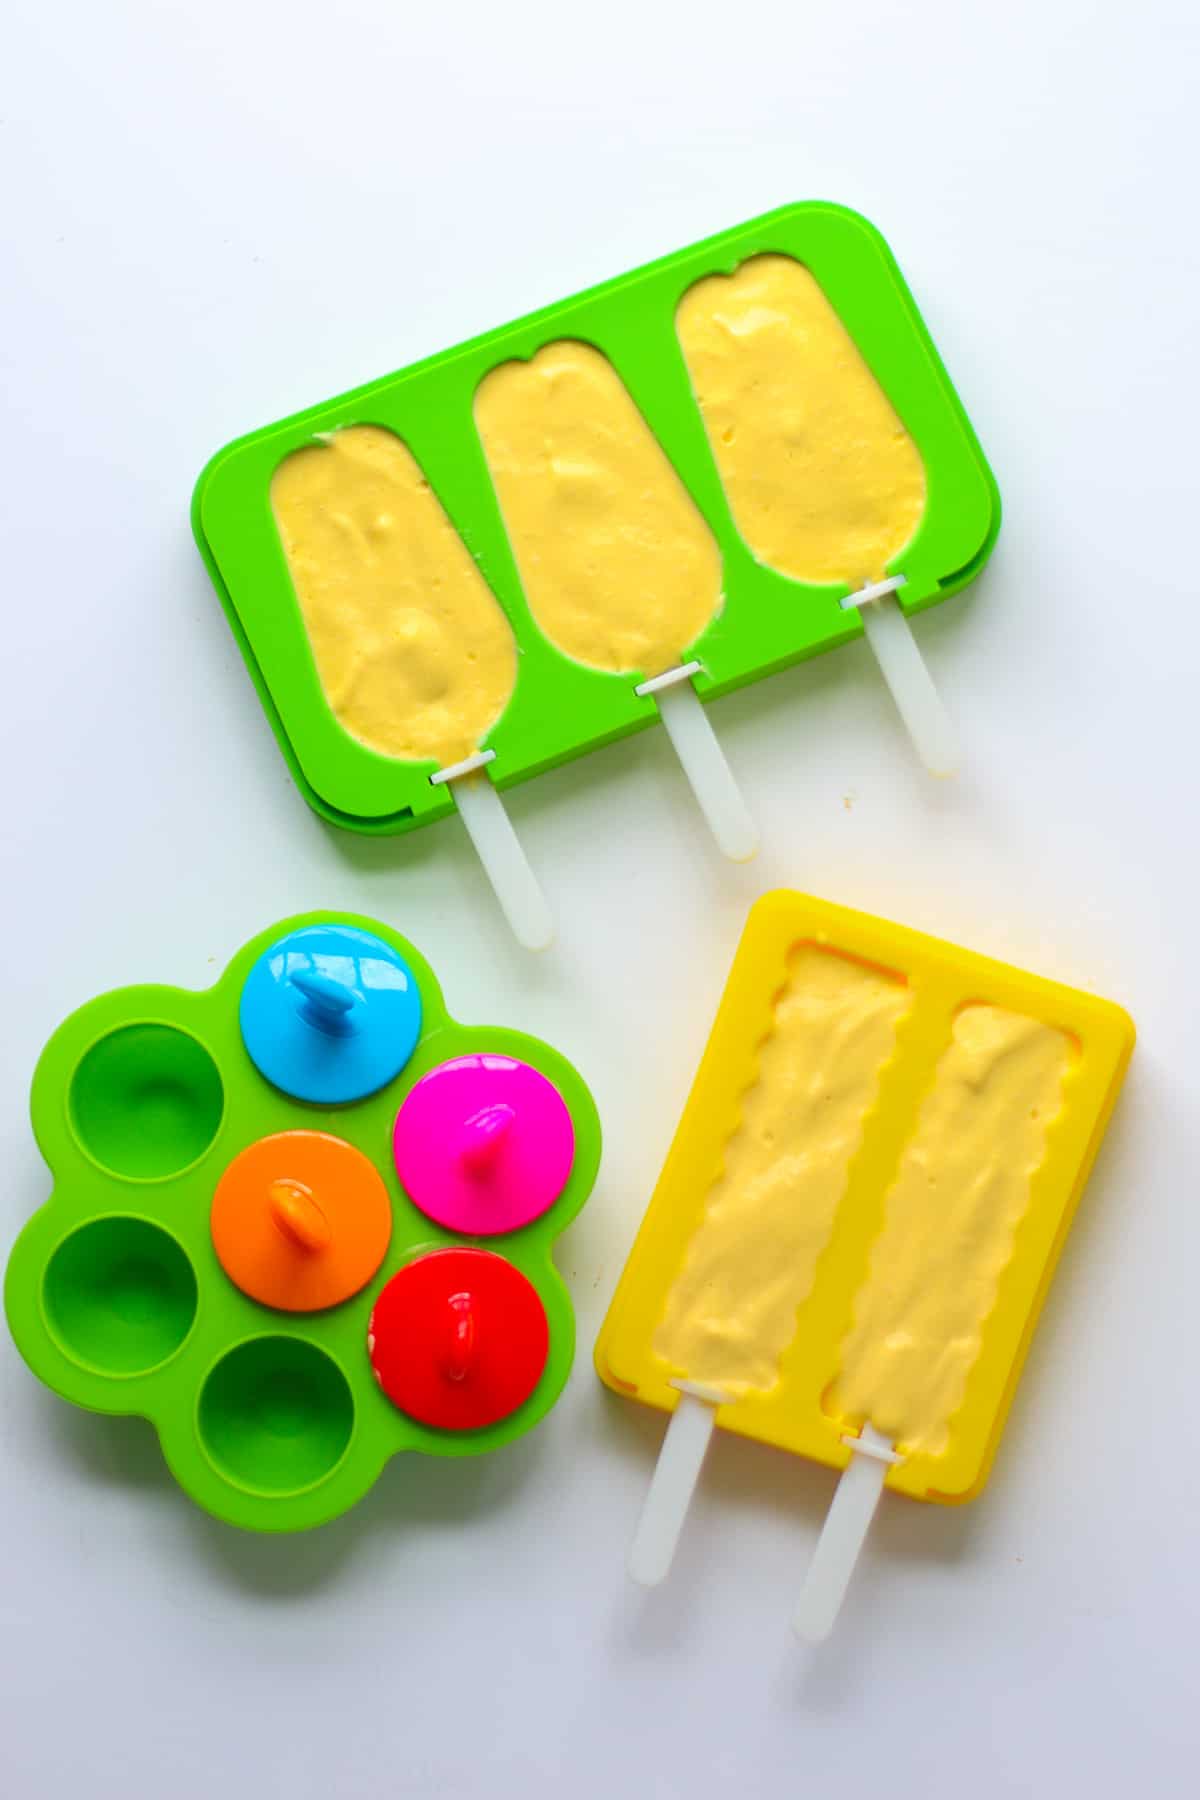 Blended mixture poured into three different popsicle molds.